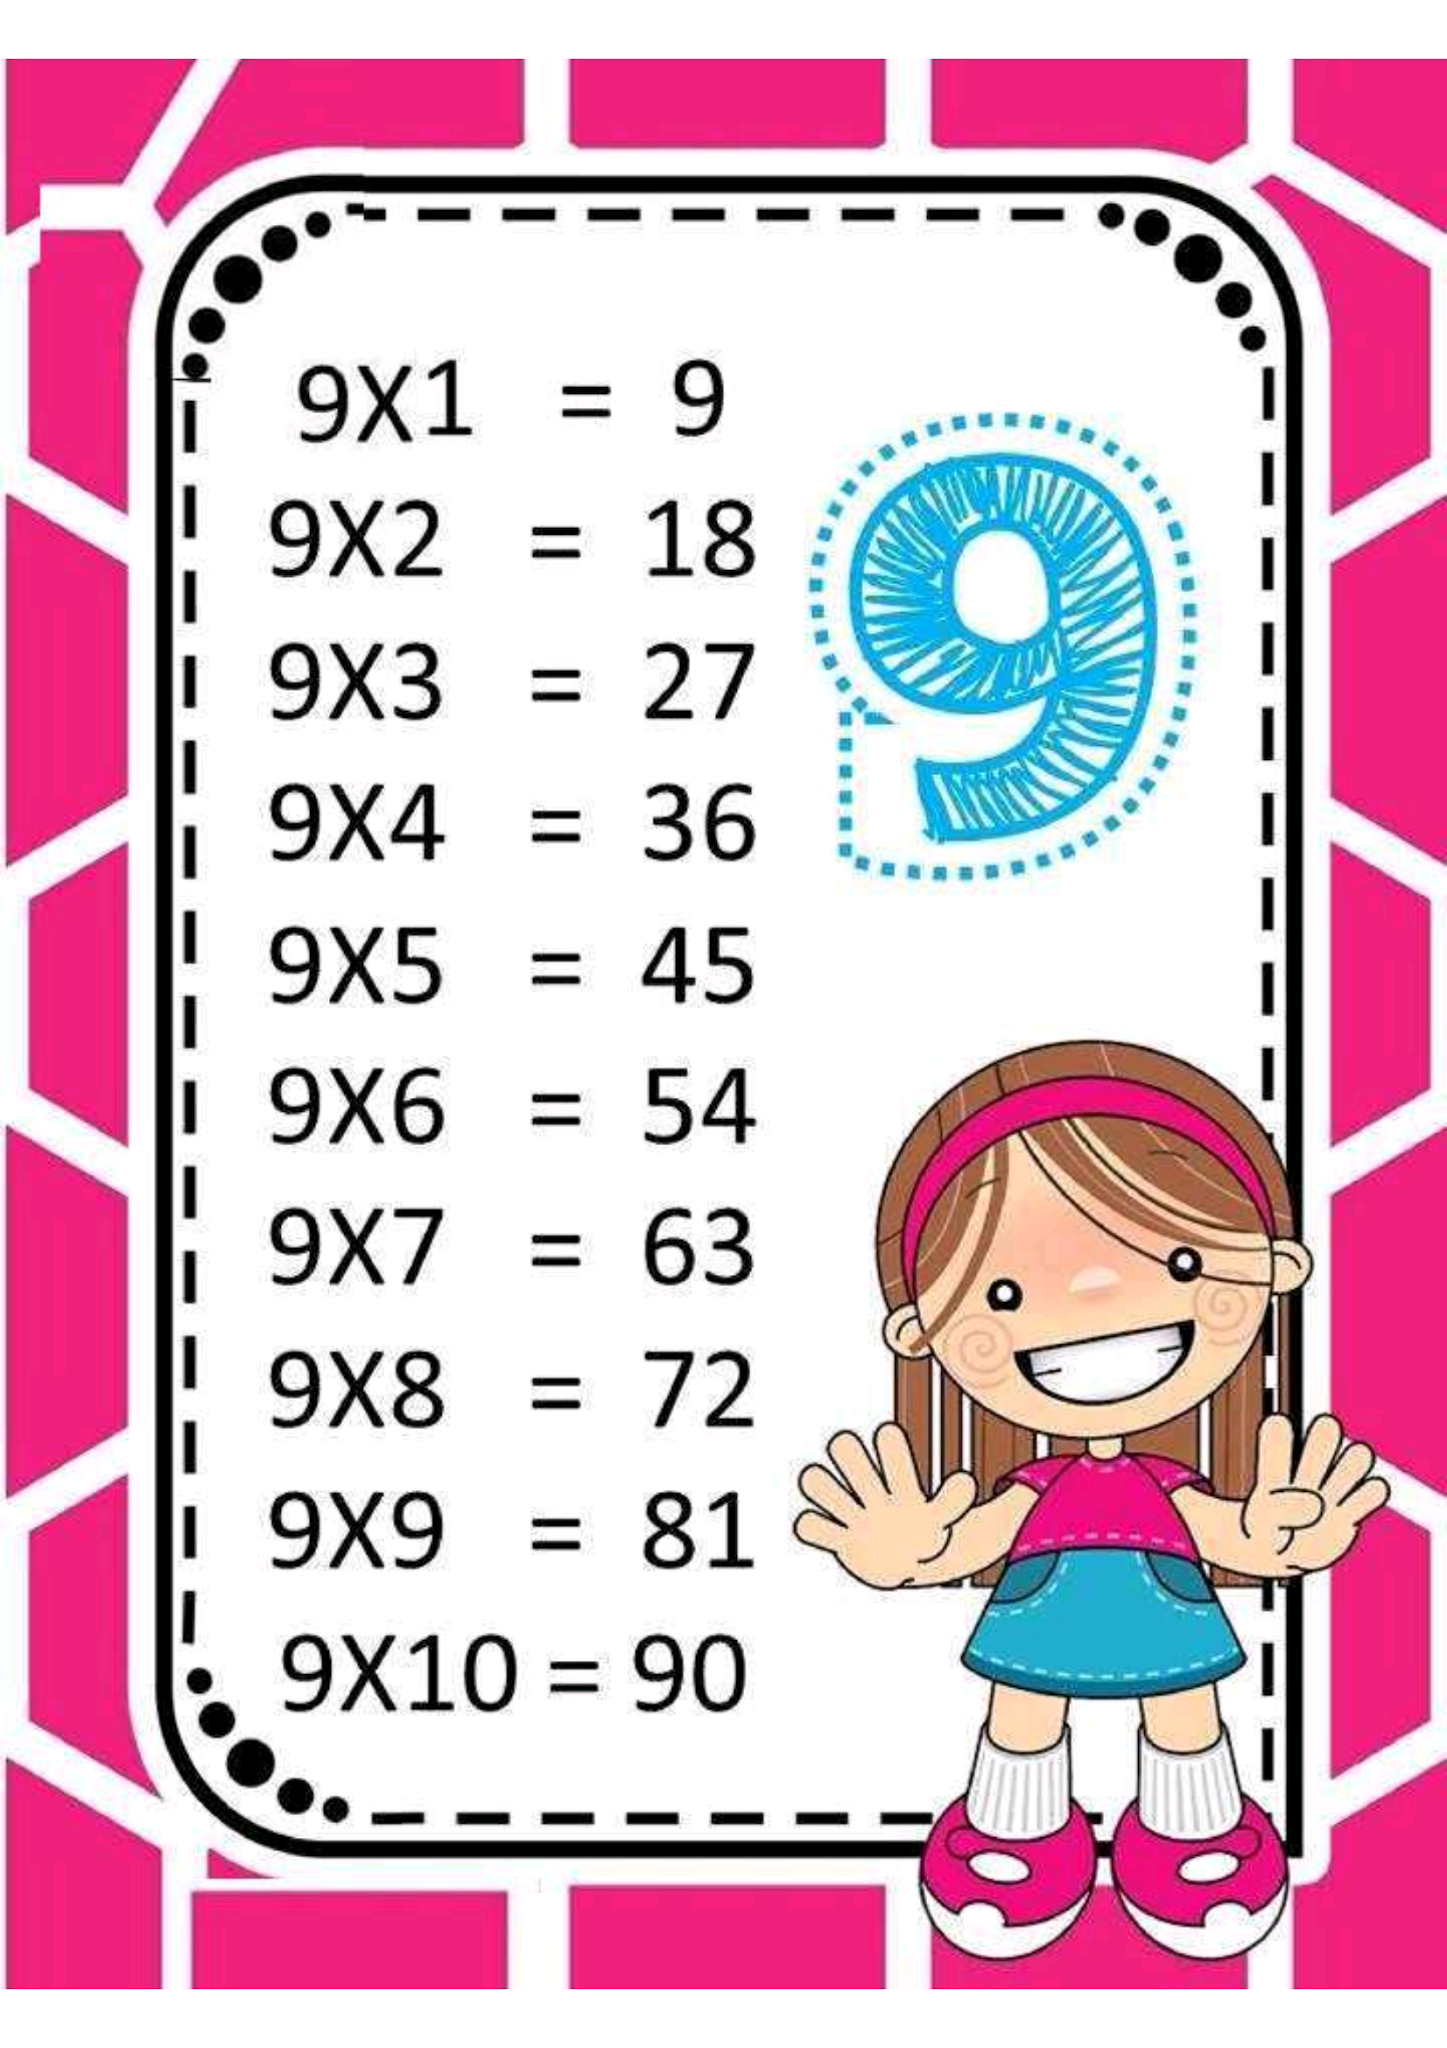 Multiplication Tables from 1 to 9